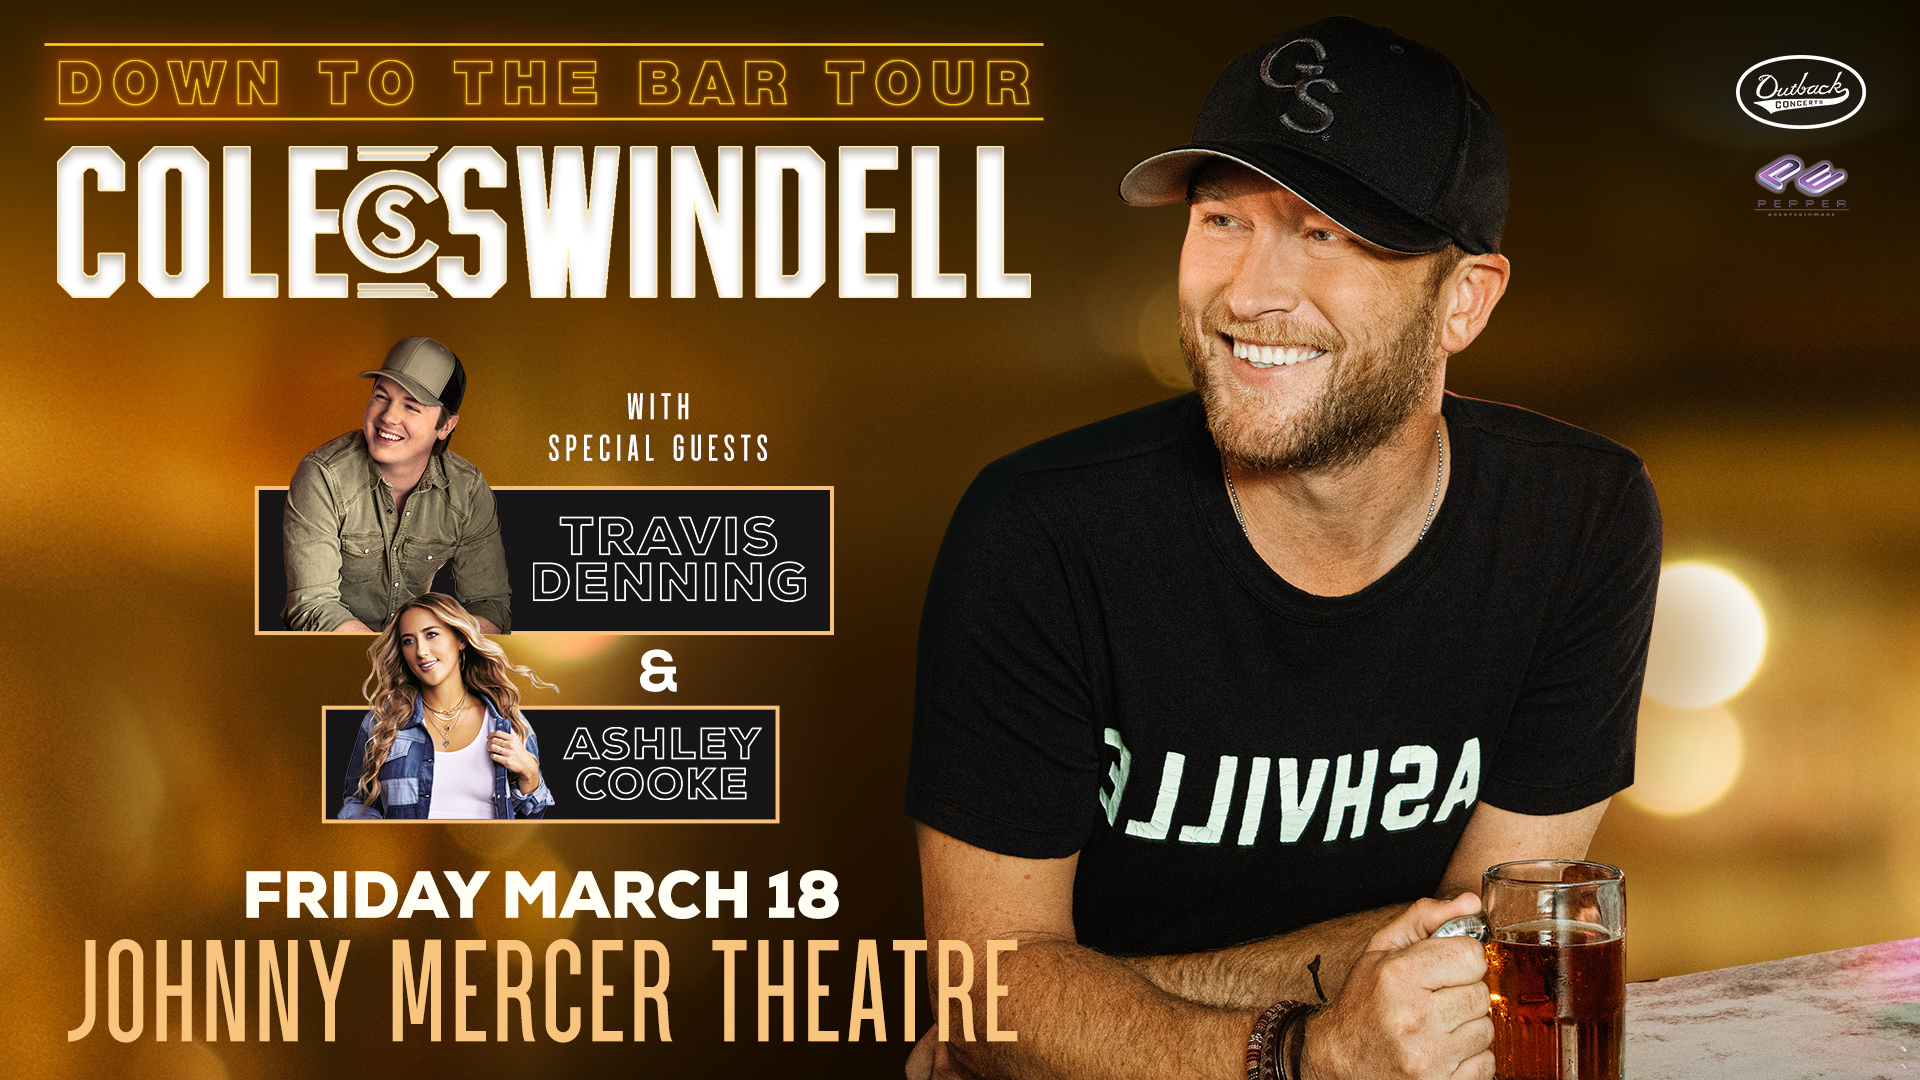 LAST CHANCE FOR COLE SWINDELL!